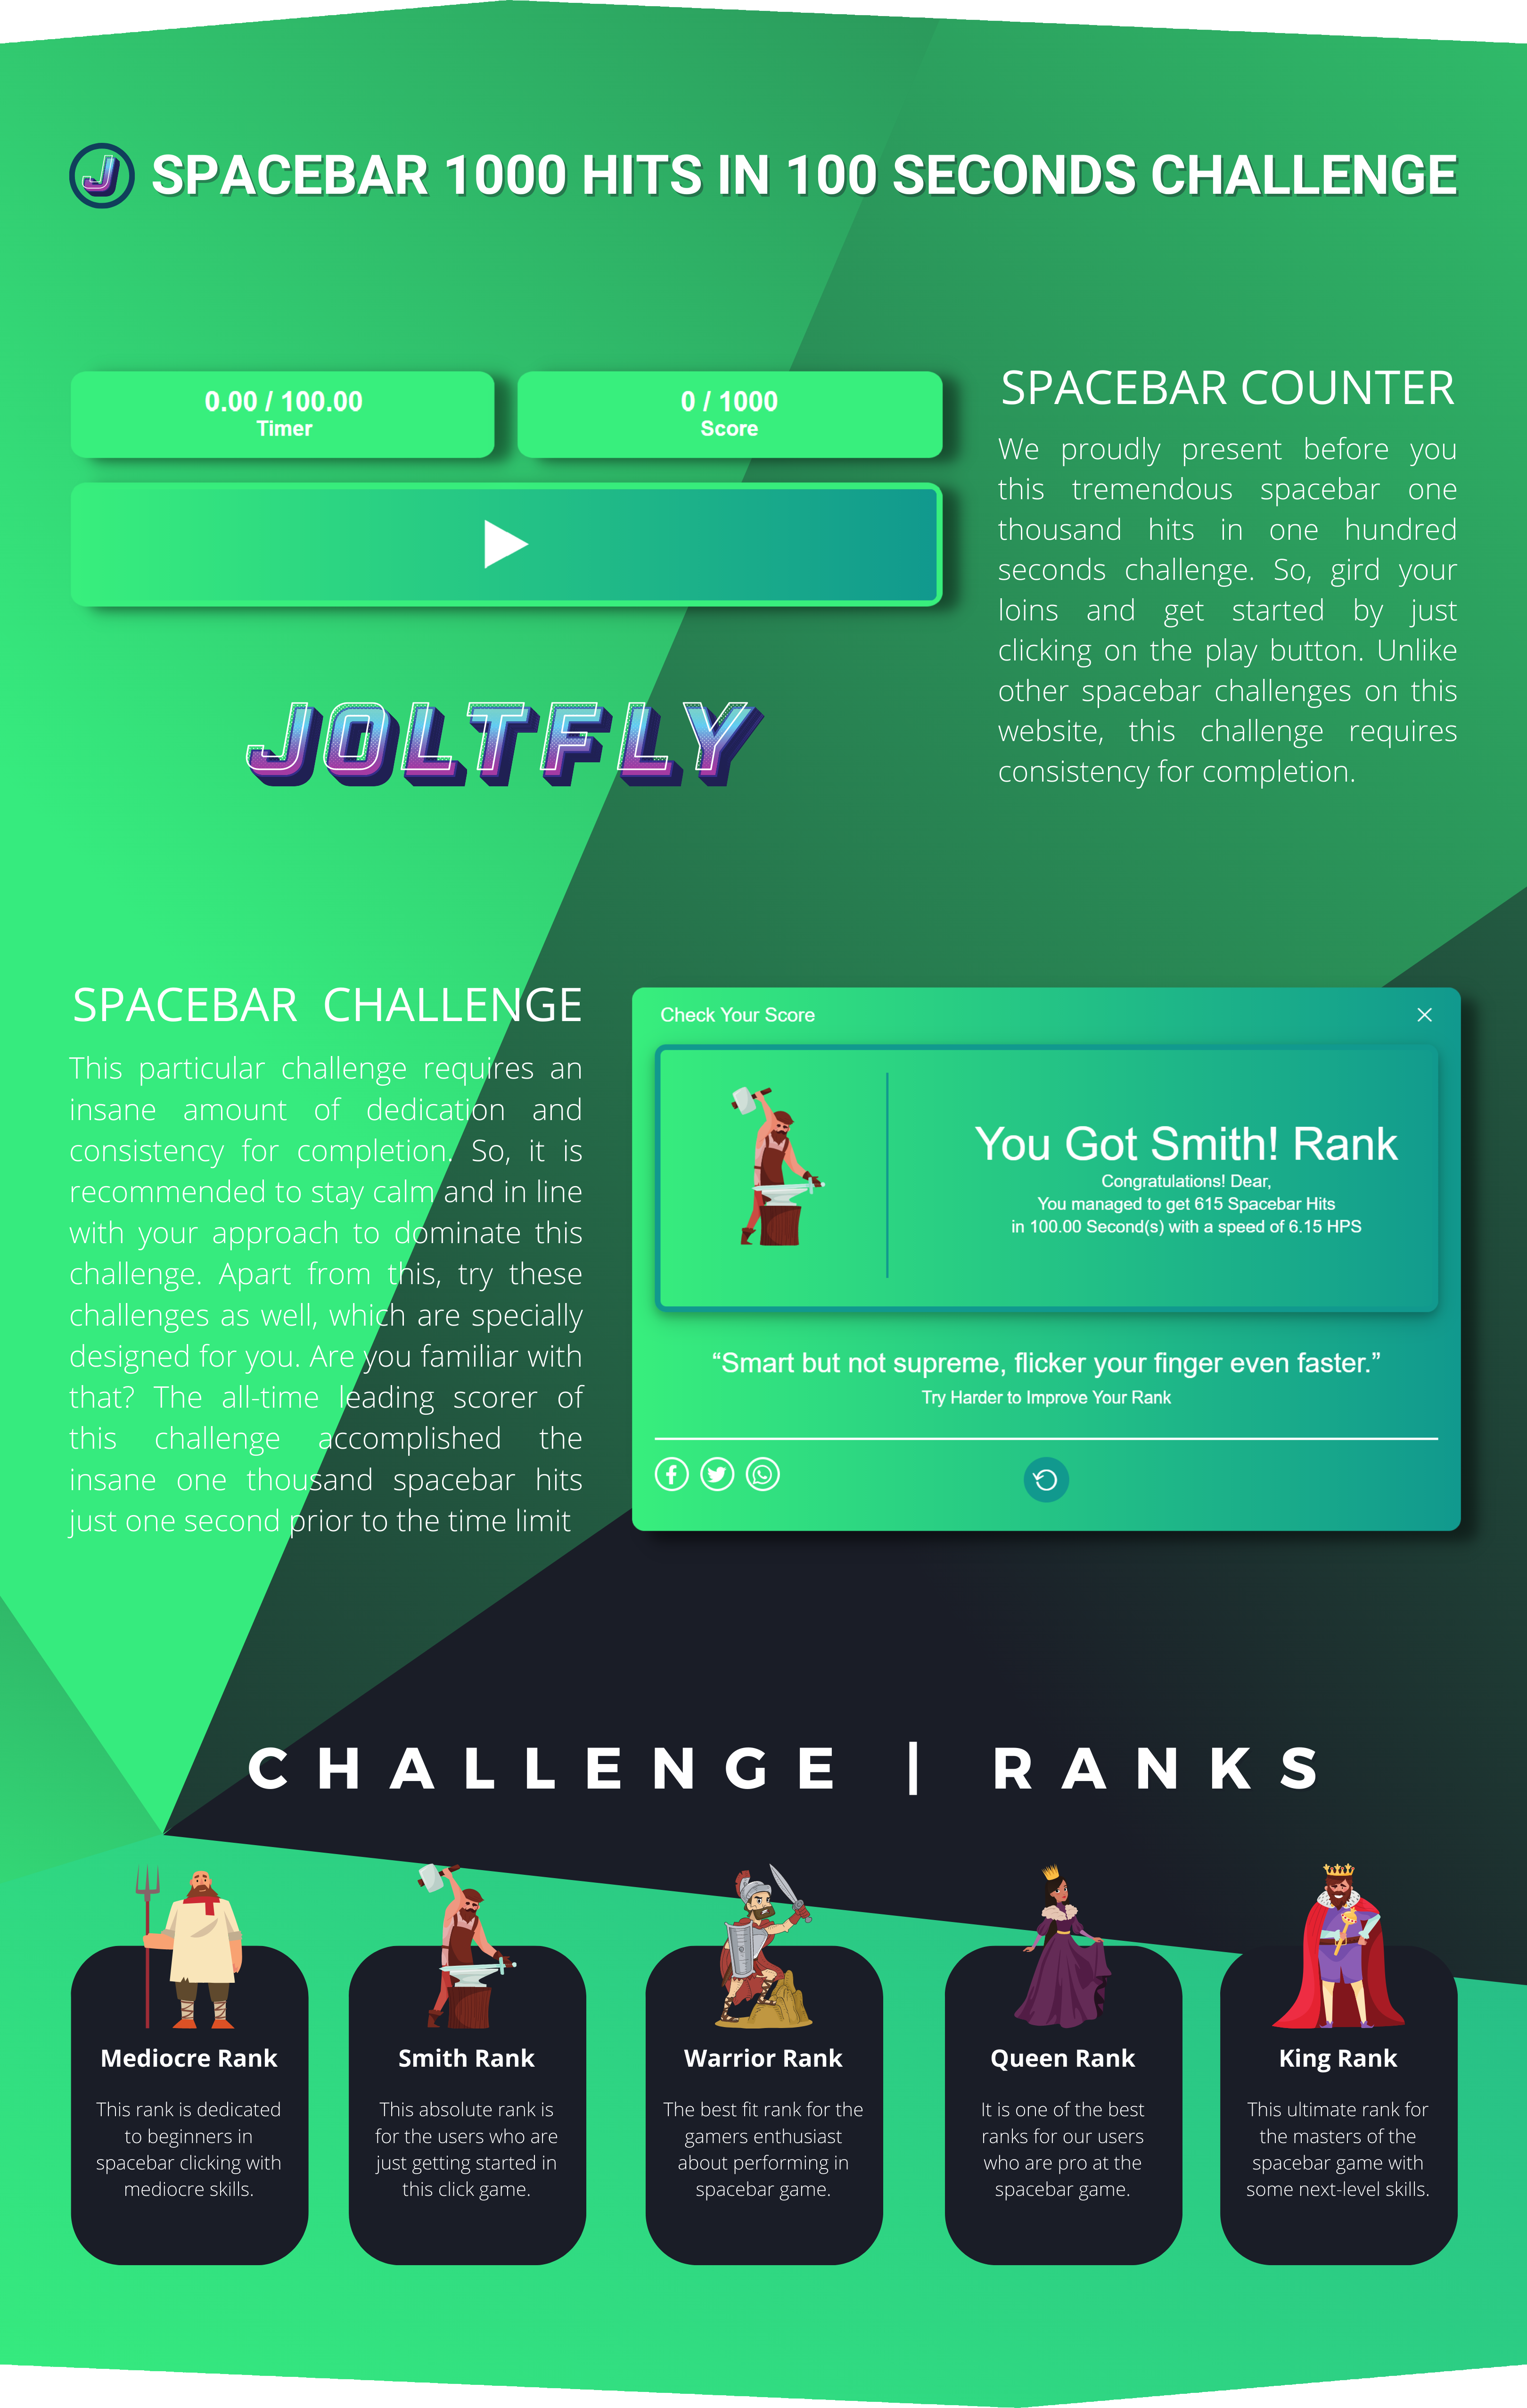 Spacebar 1000 Hits in 100 Seconds Challenge - Joltfly